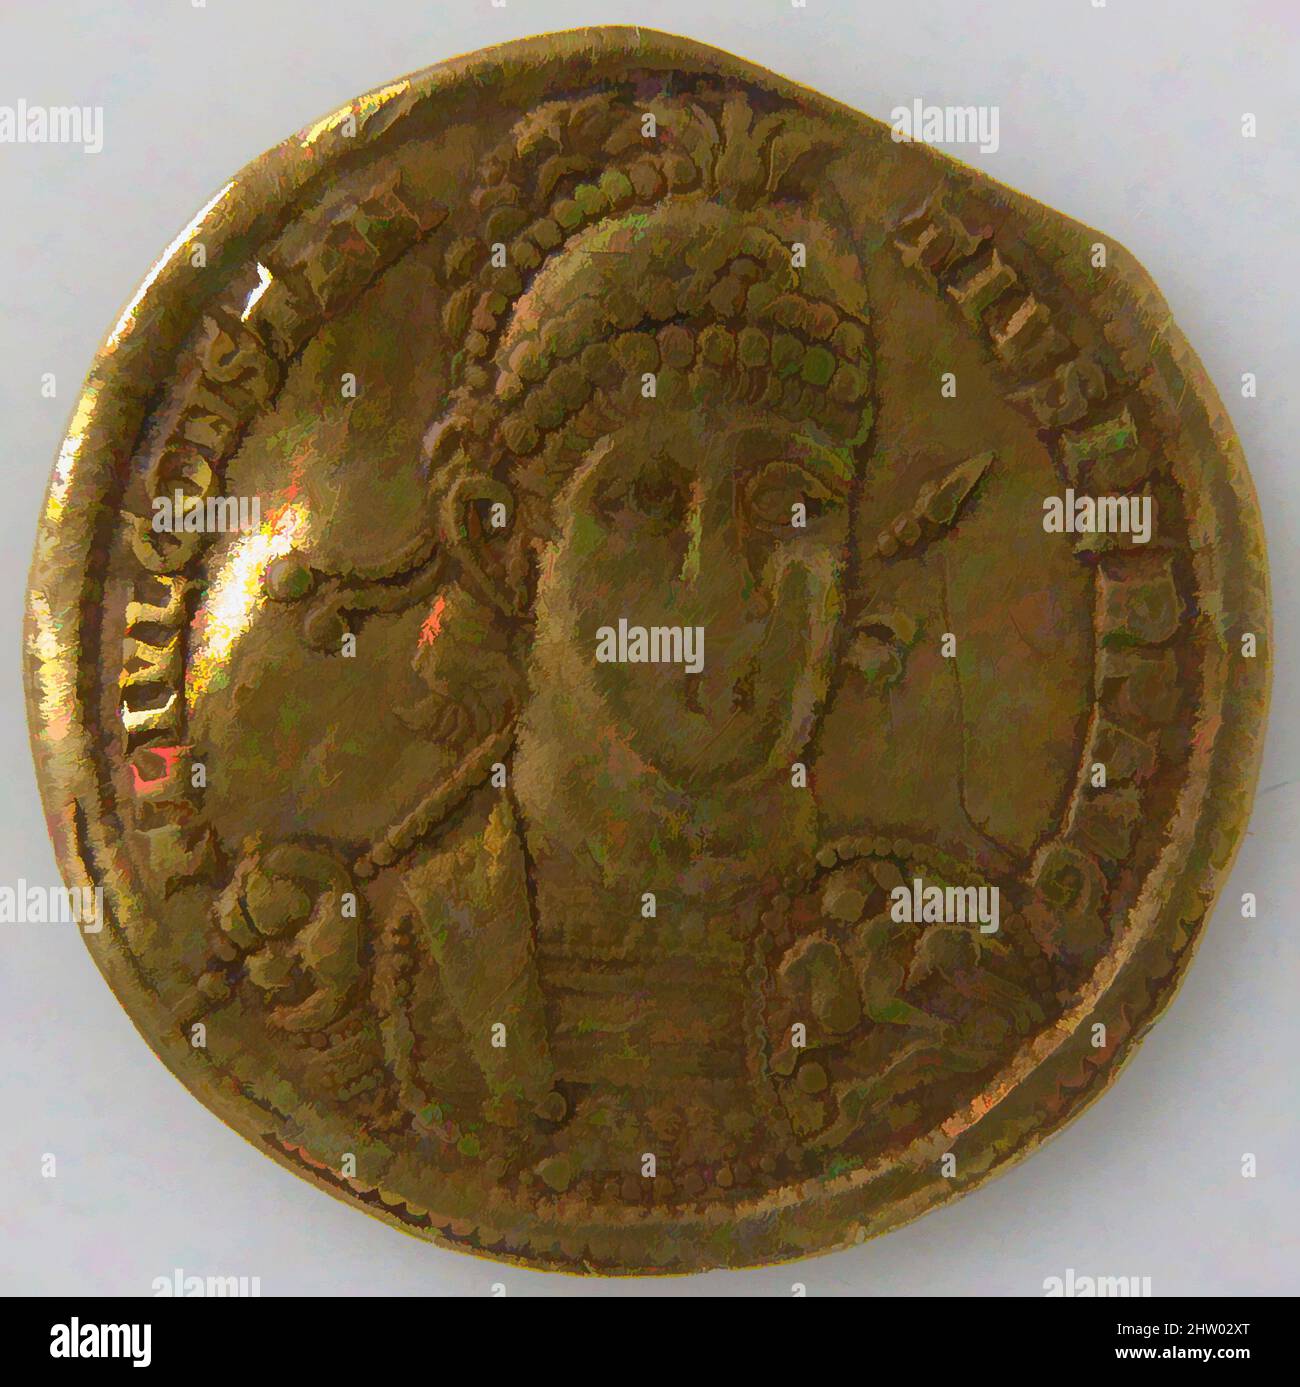 Art inspired by Solidus, 349–359, Byzantine, Gold, Overall: 13/16 x 1/16 in. (2 x 0.1 cm), Coins, Classic works modernized by Artotop with a splash of modernity. Shapes, color and value, eye-catching visual impact on art. Emotions through freedom of artworks in a contemporary way. A timeless message pursuing a wildly creative new direction. Artists turning to the digital medium and creating the Artotop NFT Stock Photo